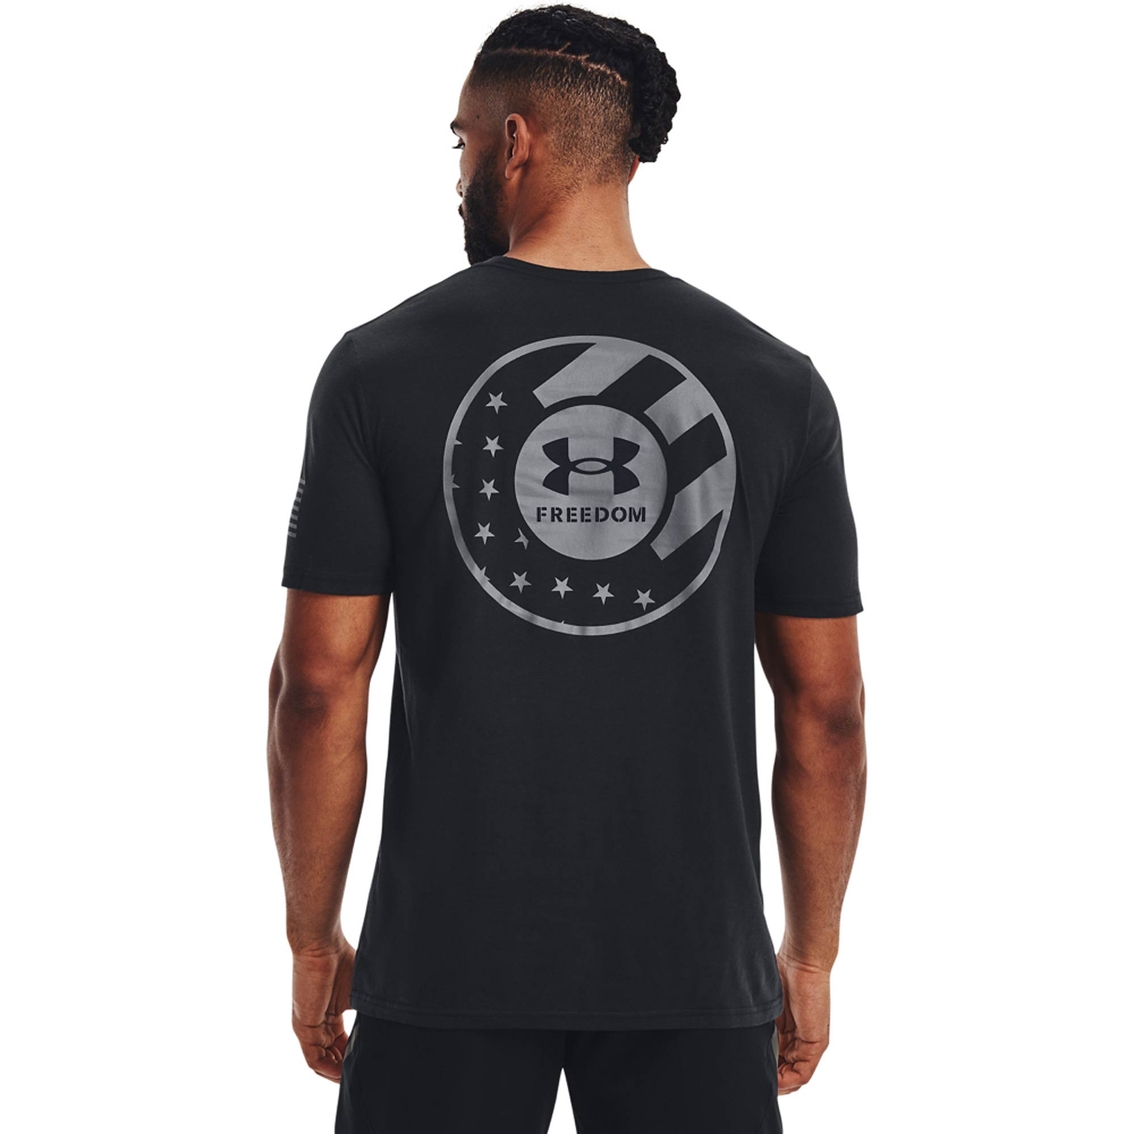 Under Armour New Freedom Flag Bold Tee | Shirts | Clothing ...